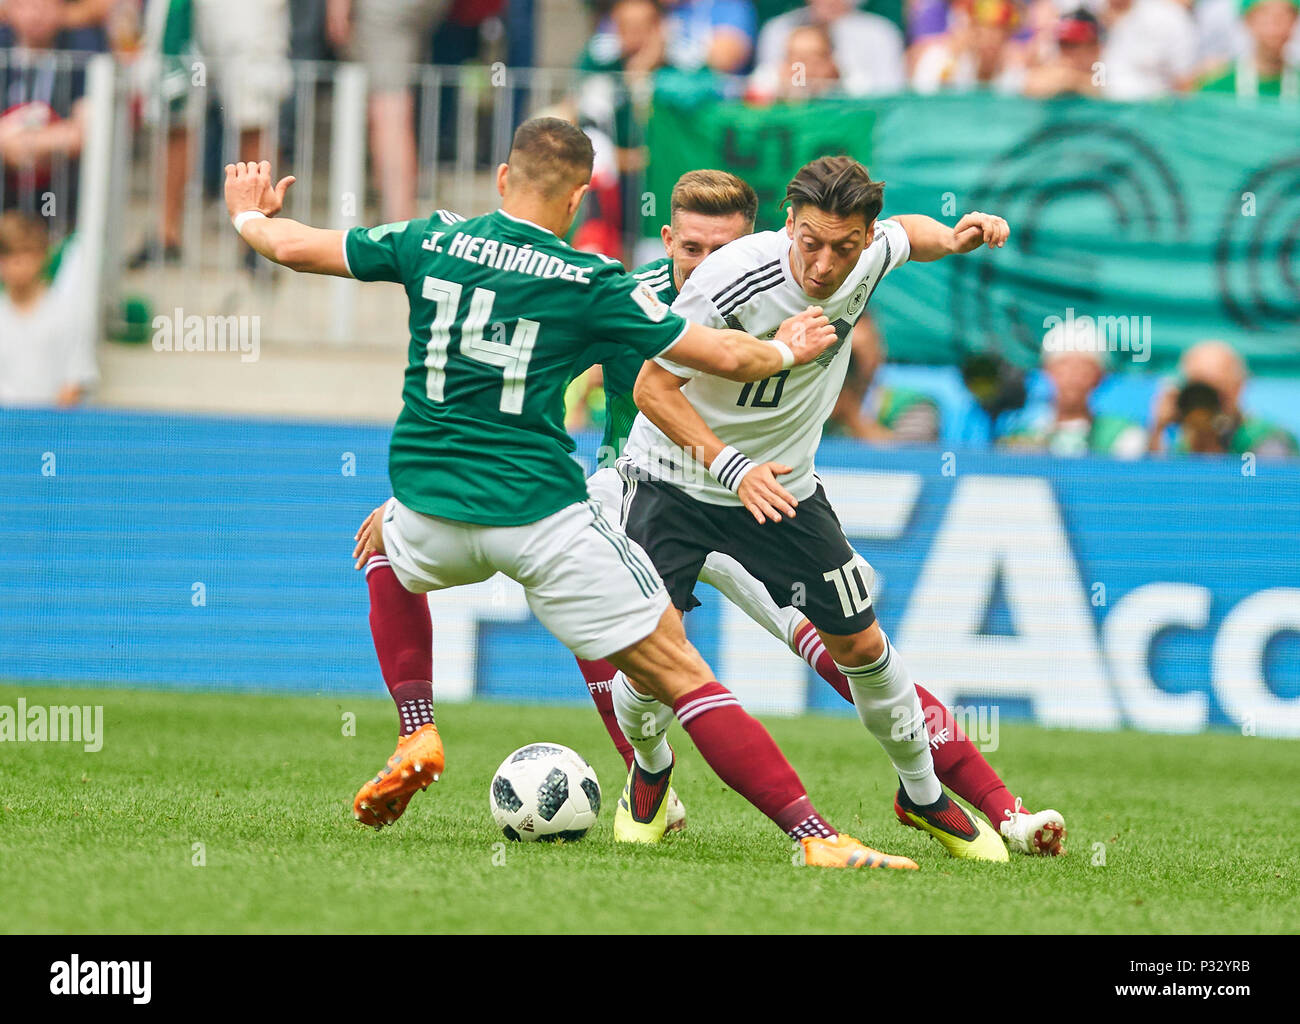 Moscow, Russia, 17 June 2018. Germany - Mexico, Soccer, Moscow, June 17, 2018 Mesut OEZIL, DFB 10  compete for the ball, tackling, duel, header against Javier HERNANDEZ, MEX 14  GERMANY - MEXICO FIFA WORLD CUP 2018 RUSSIA, Group F, Season 2018/2019,  June 17, 2018 L u z h n i k i Stadium in Moscow, Russia.  © Peter Schatz / Alamy Live News Stock Photo